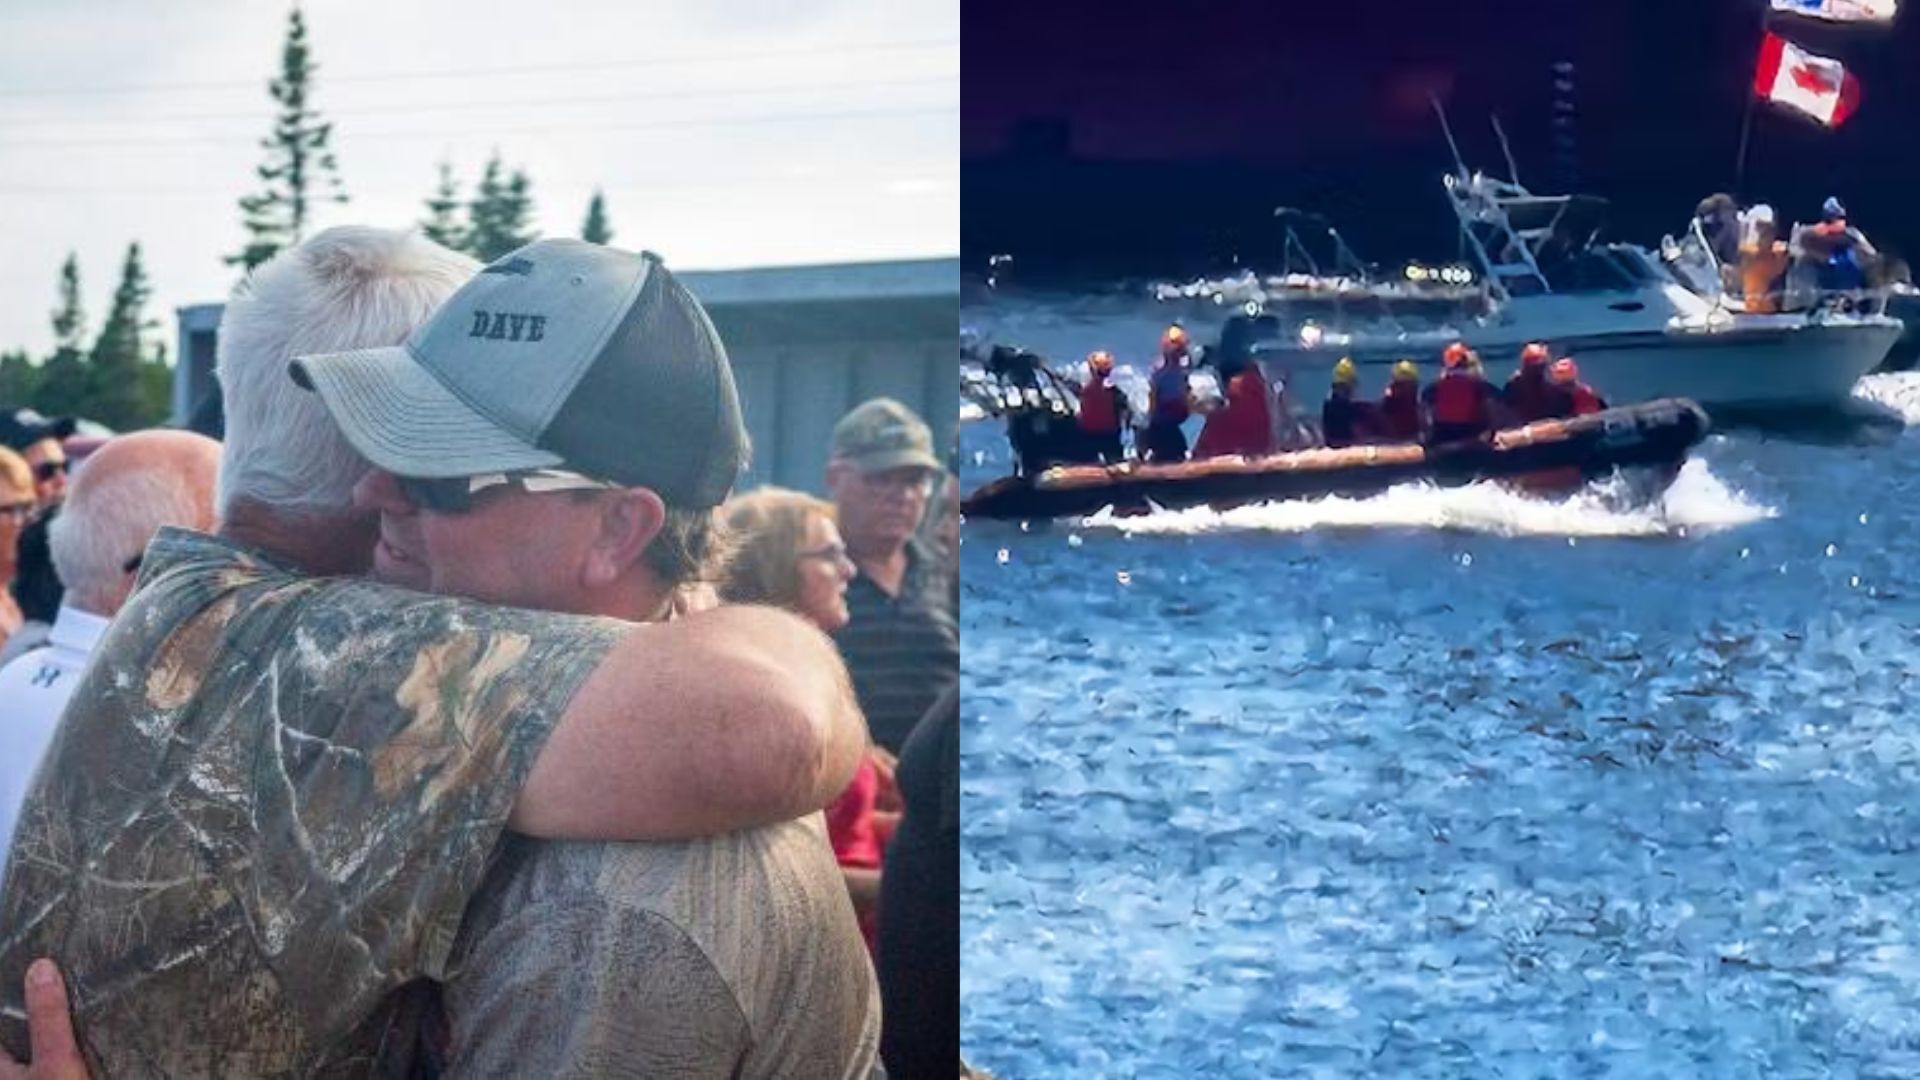 7 fishermen were just heroically rescued off the coast of Newfoundland